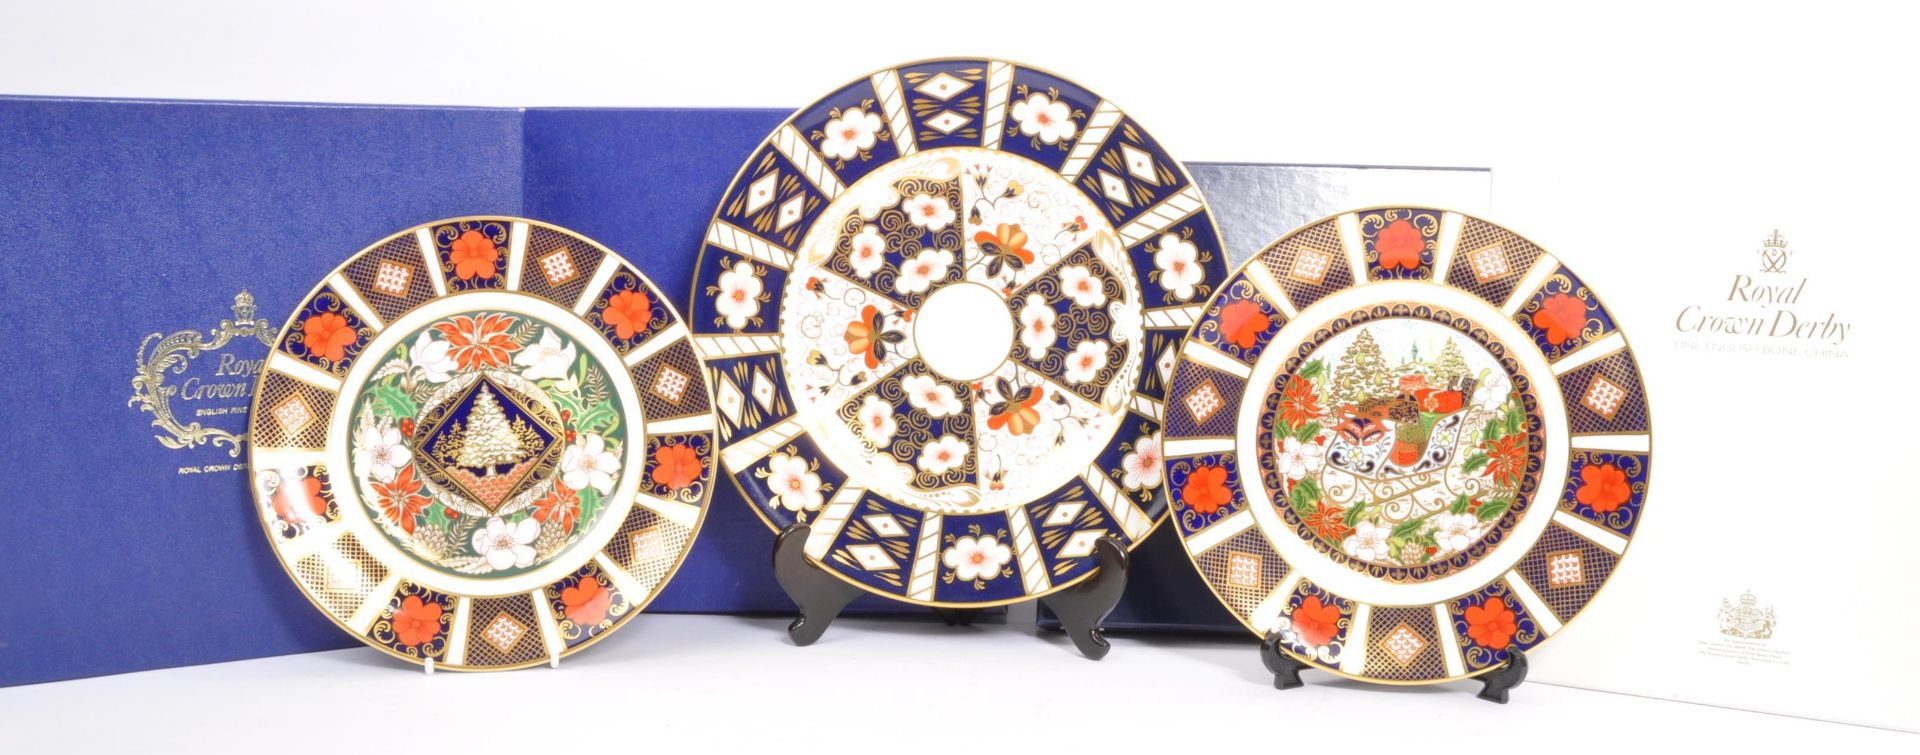 A COLLECTION OF ROYAL CROWN DERBY IMARI PLATES - Image 5 of 11